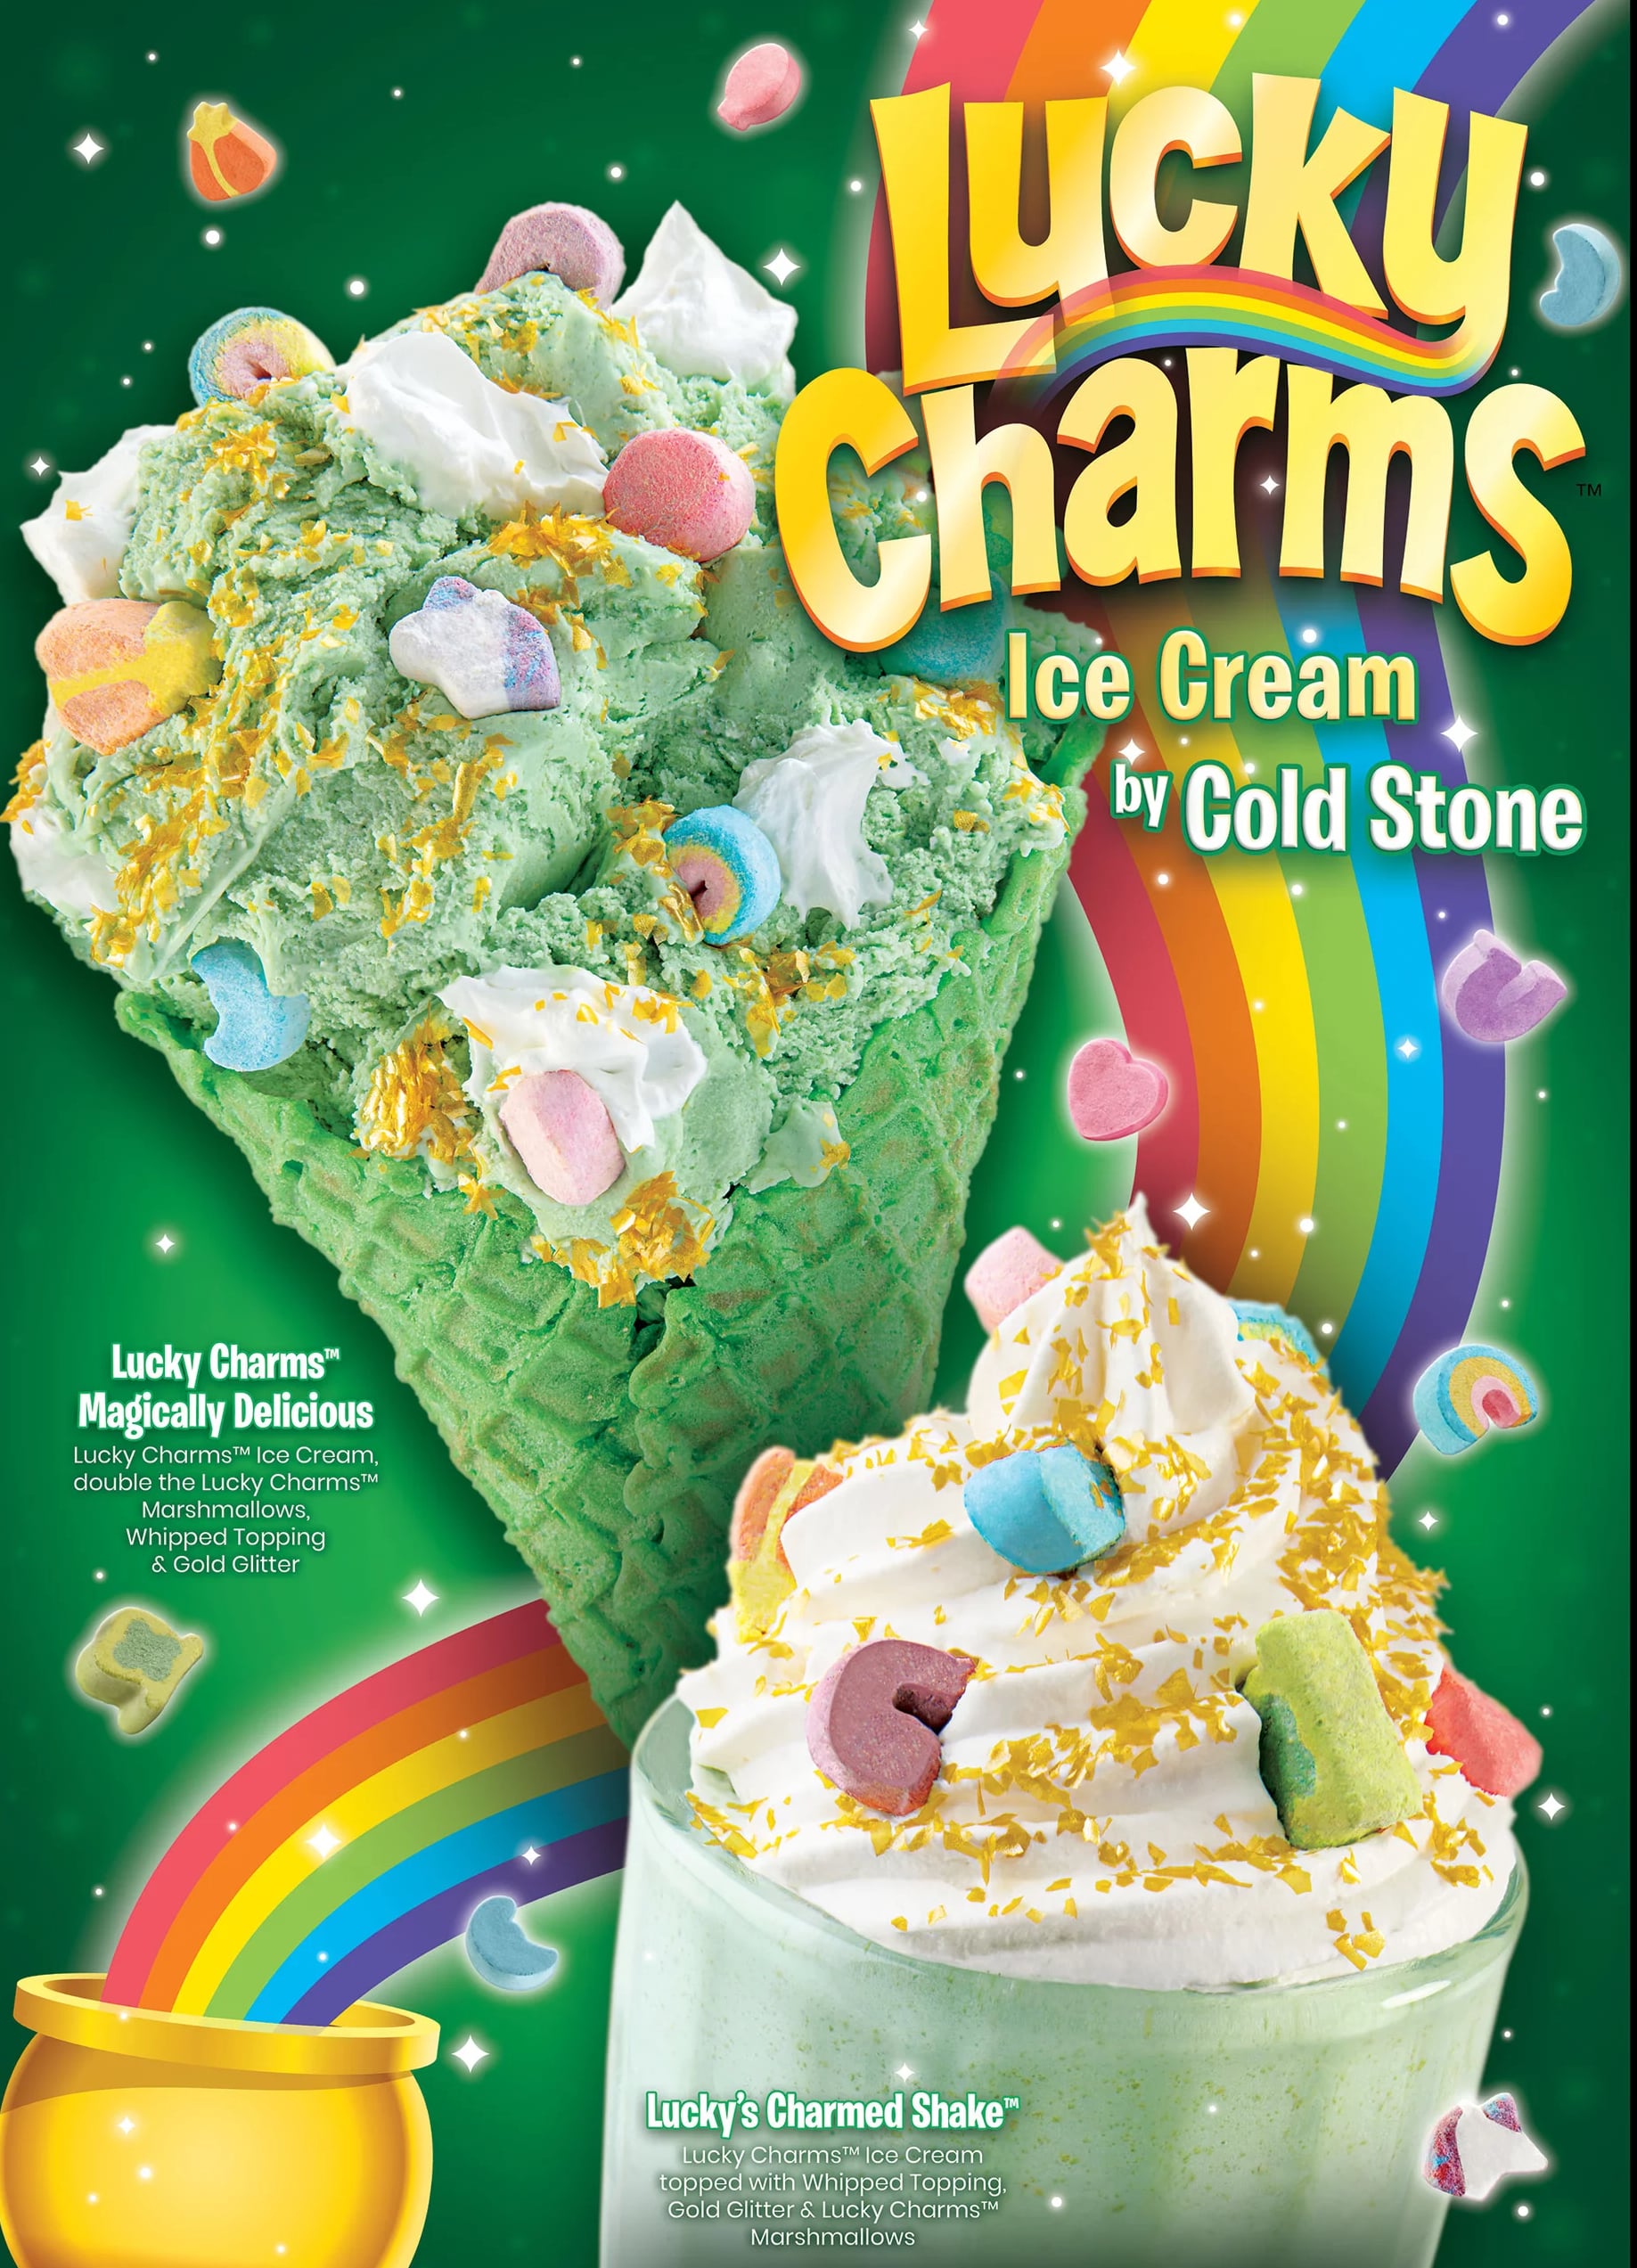 Cold Stone Has Lucky Charms Ice Cream For St. Patrick's Day! POPSUGAR